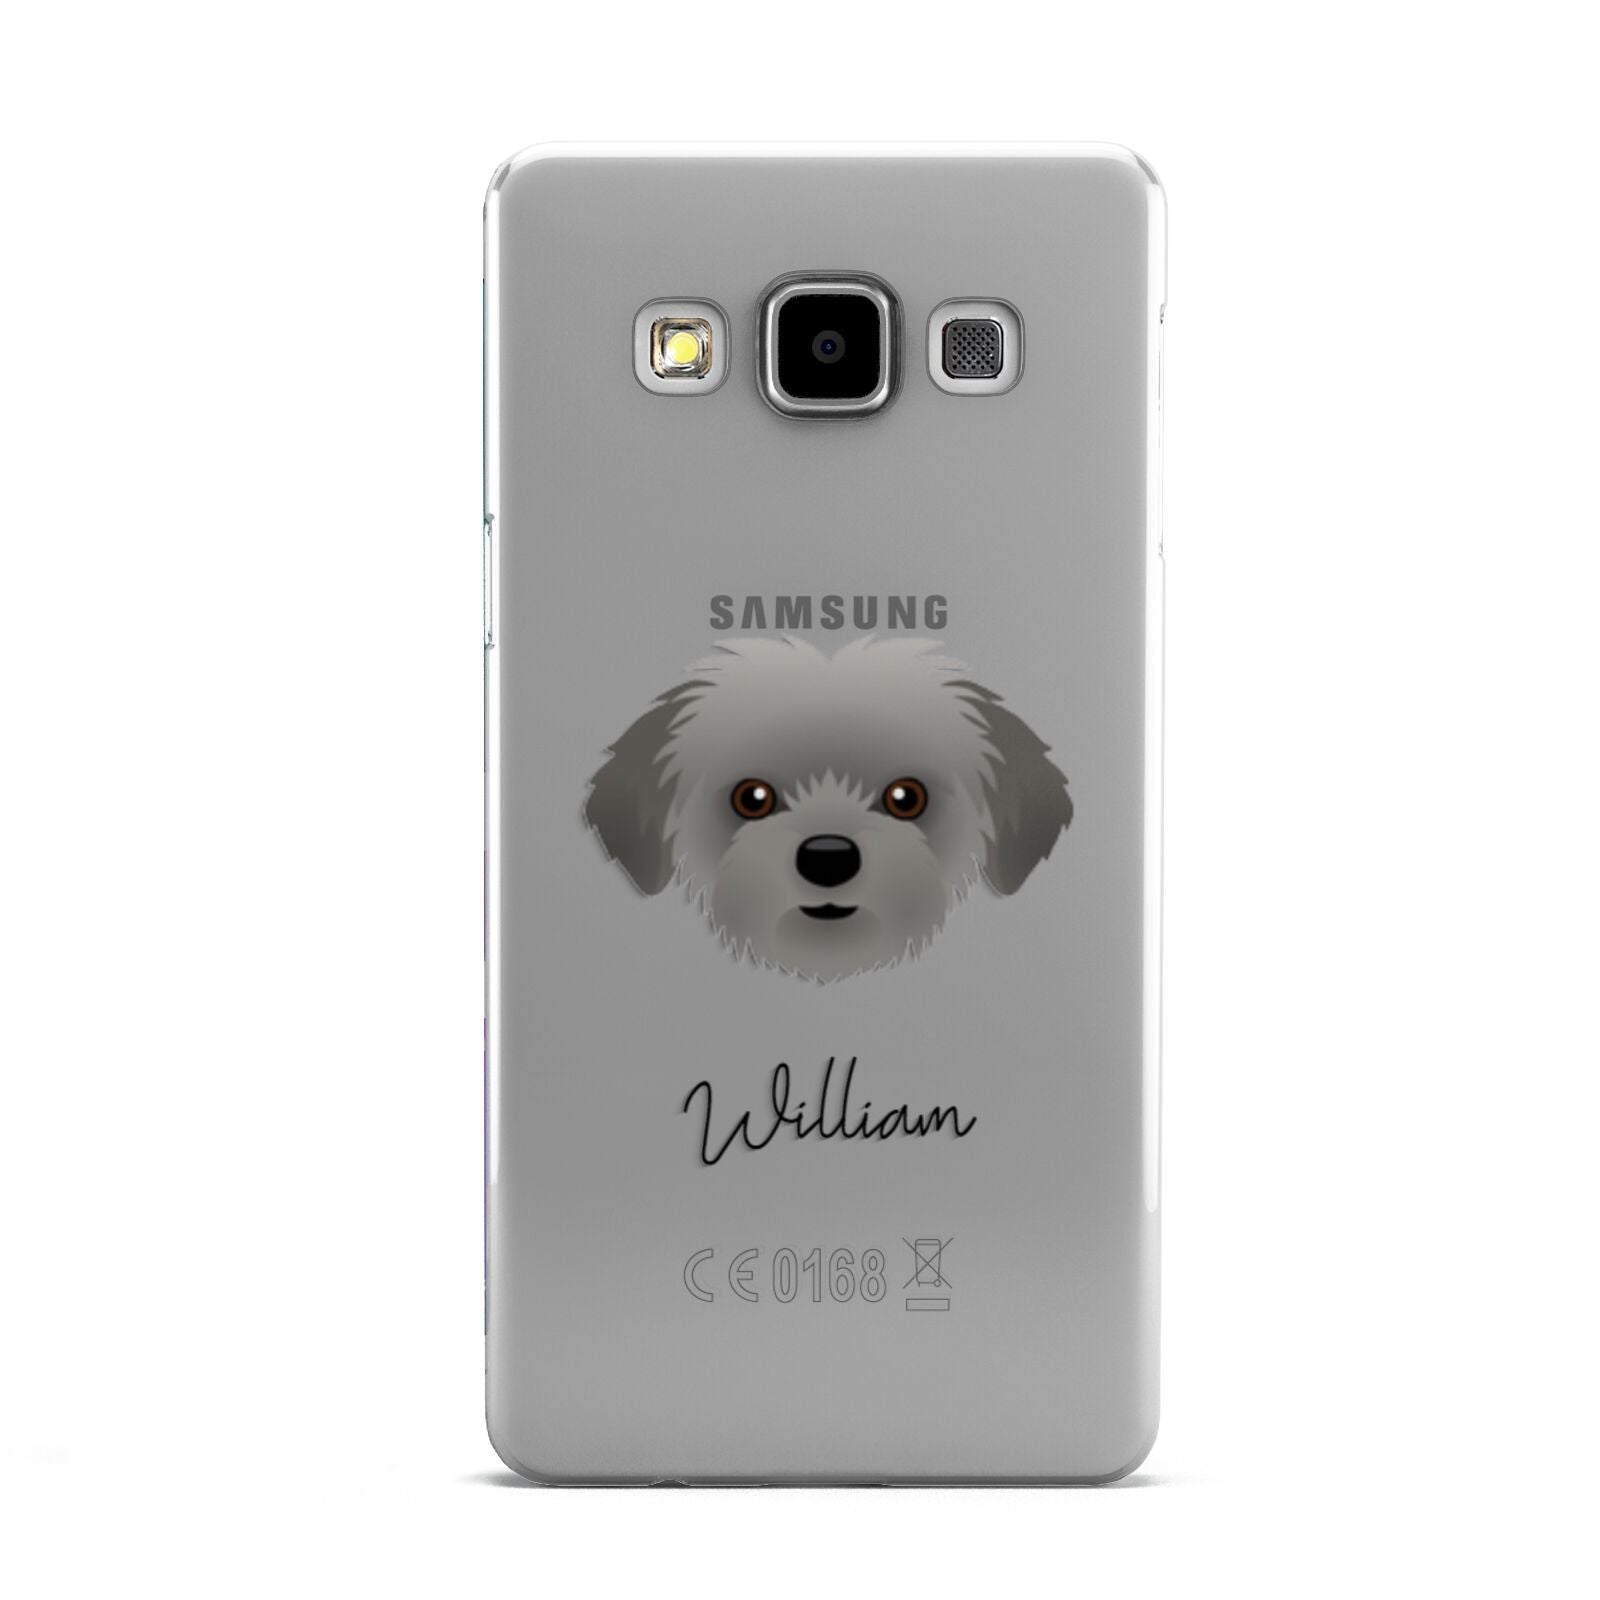 Shorkie Personalised Samsung Galaxy A5 Case